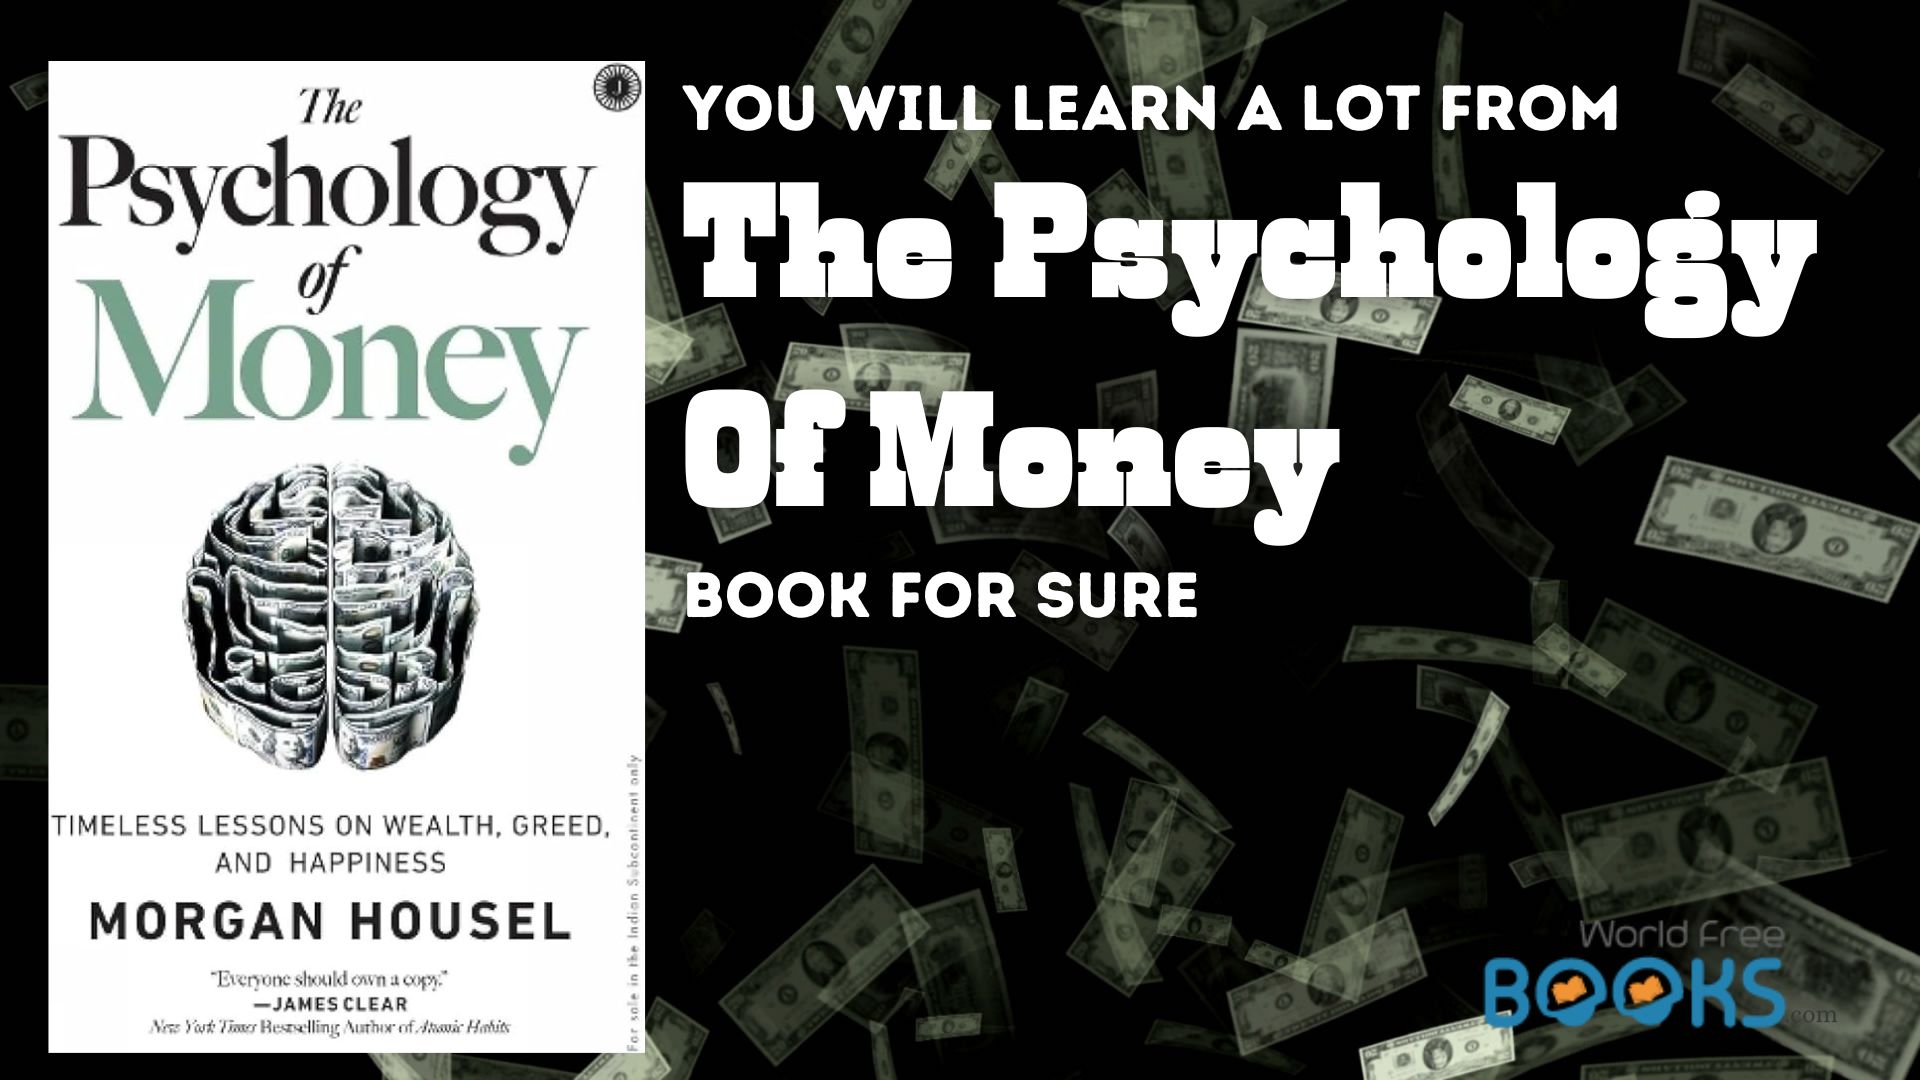 You Will Learn A Lot From The Psychology Of Money Book For Sure